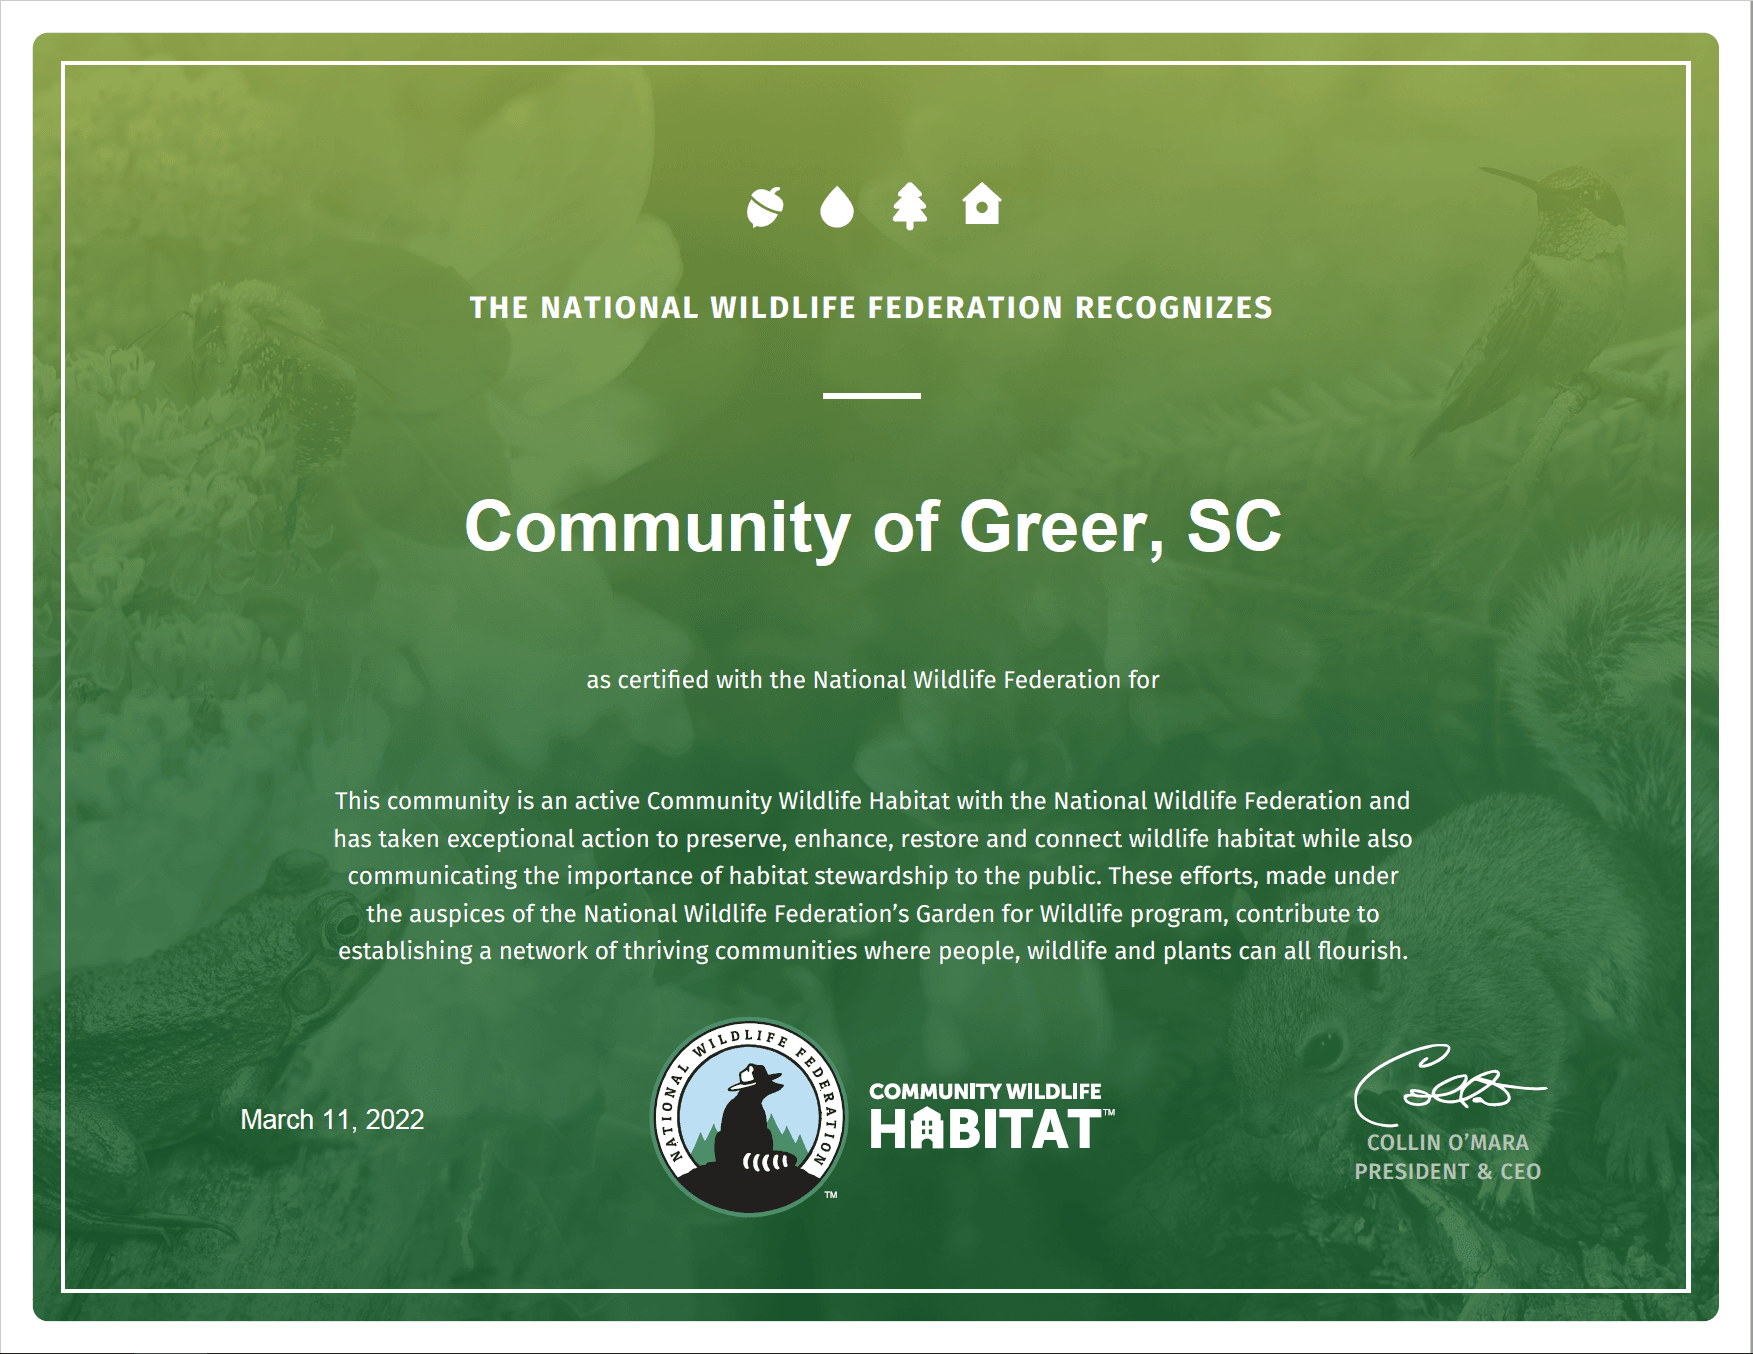 The City of Greer was recognized as a National Community Wildlife Habitat on May 24, 2022.